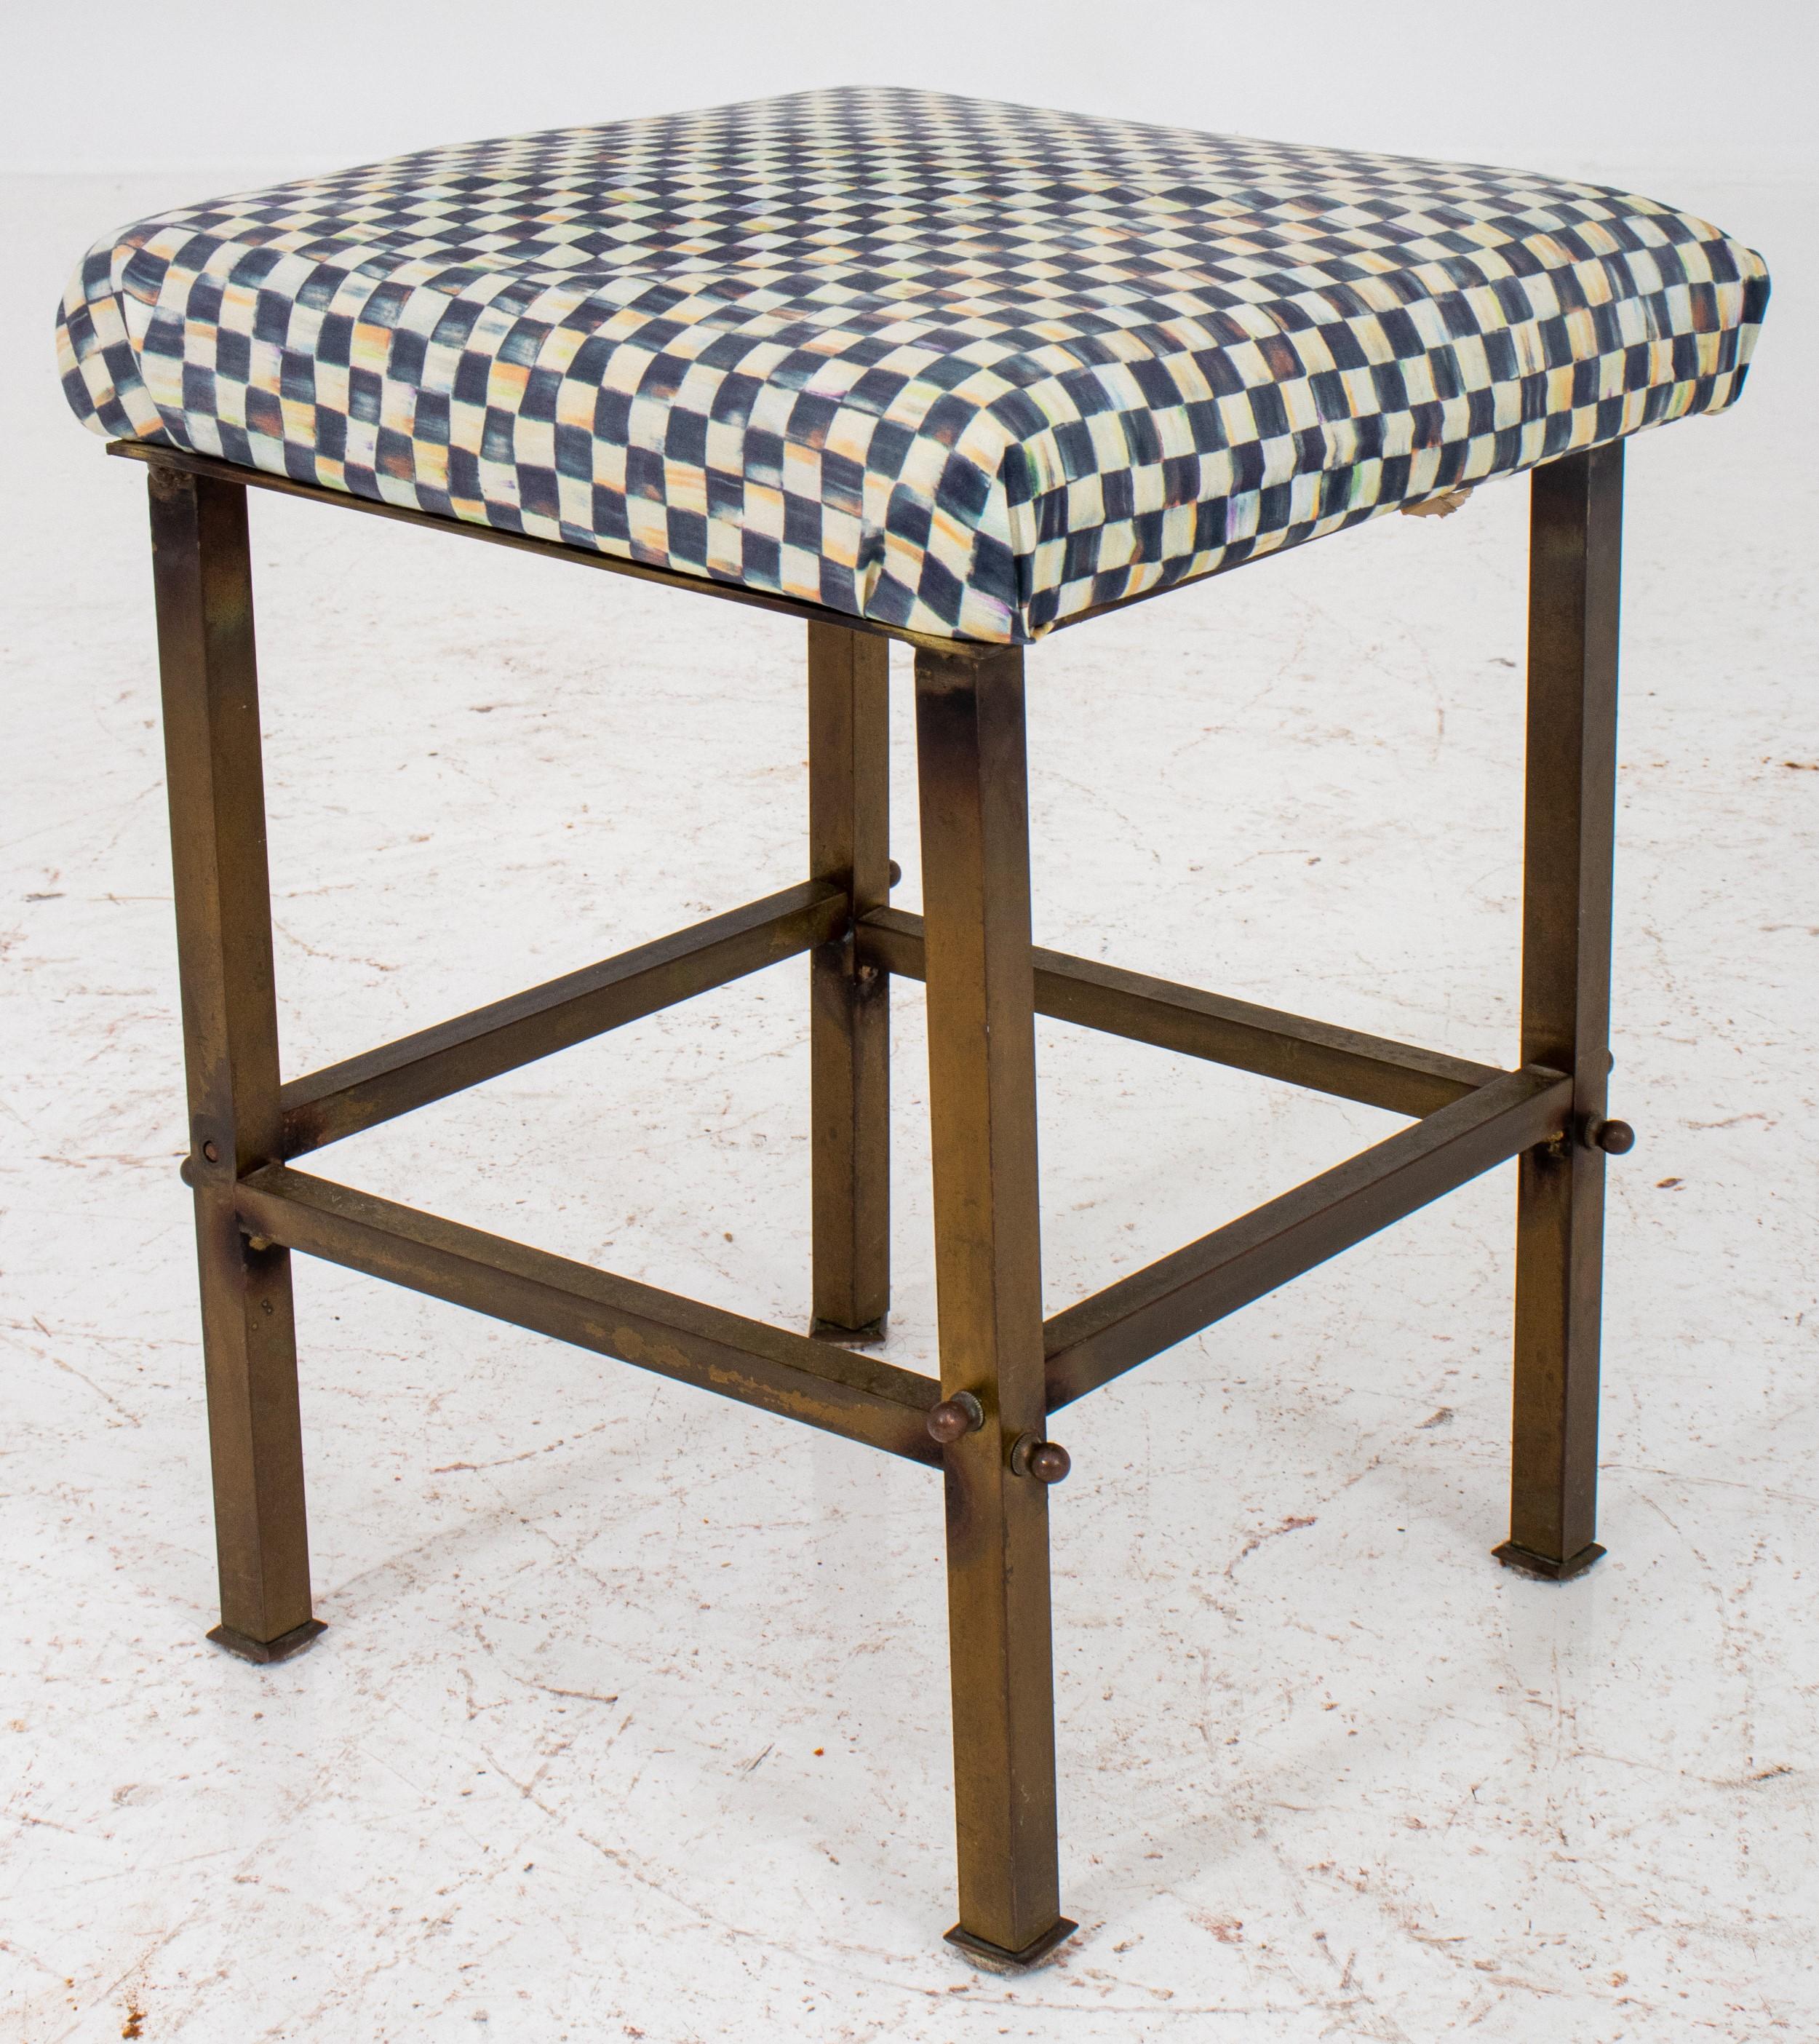 Diminutive square brass stool. Here's a breakdown of its key features:

Material: Brass - The frame of the stool is made of brass, likely polished for a shiny gold appearance.
Size: Diminutive - The small size suggests it's not intended for regular